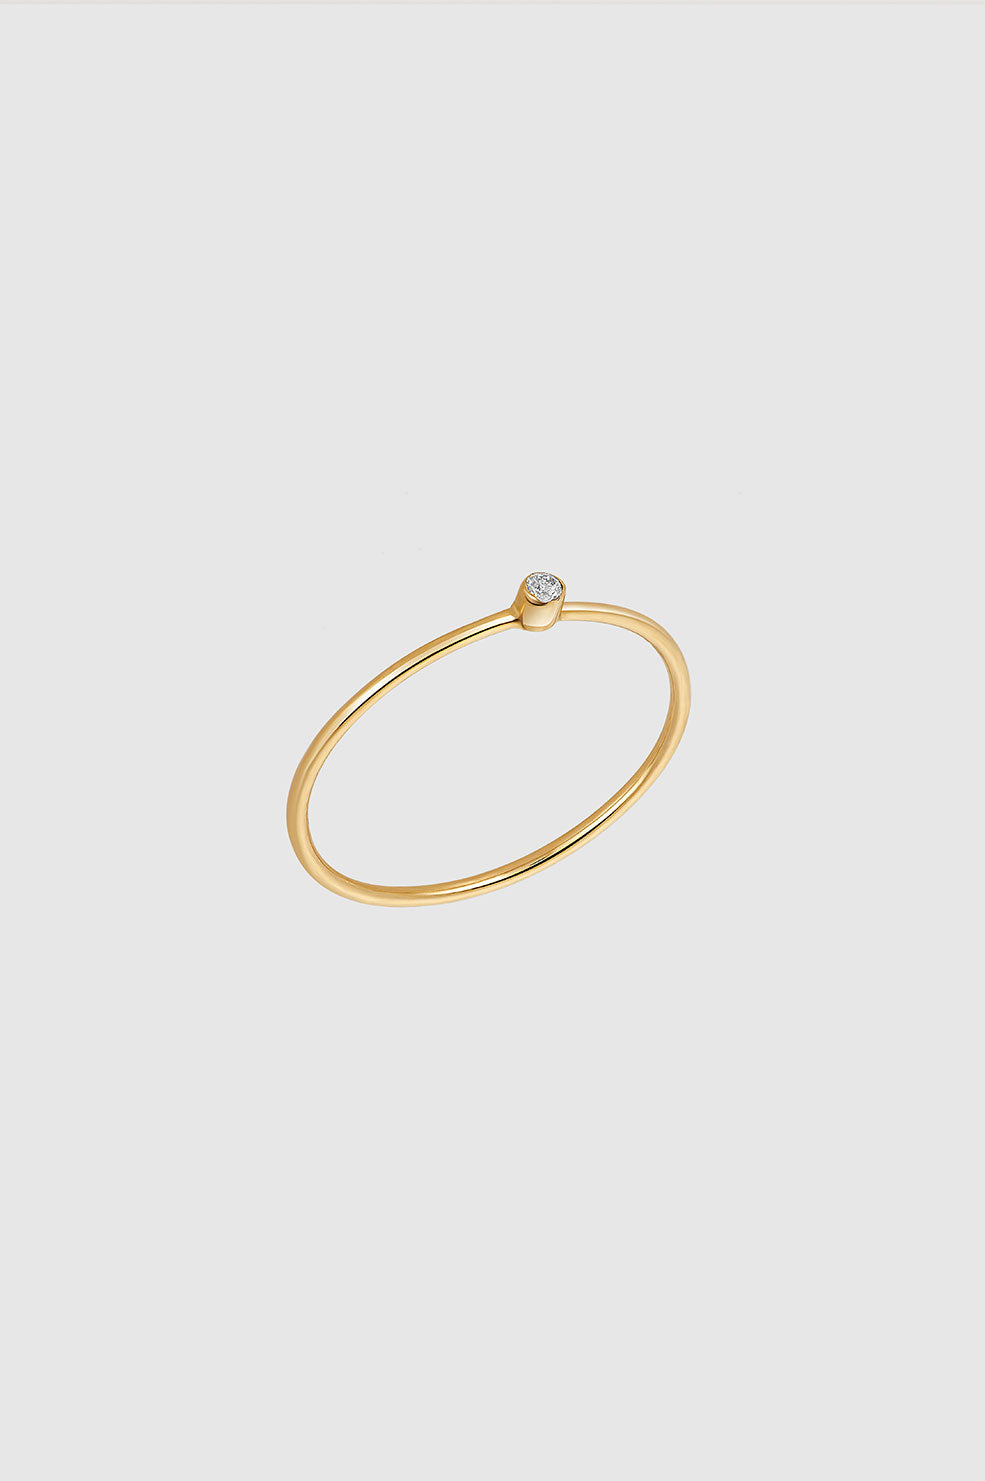 ANINE BING Stacking Ring With Diamond in 14k Gold